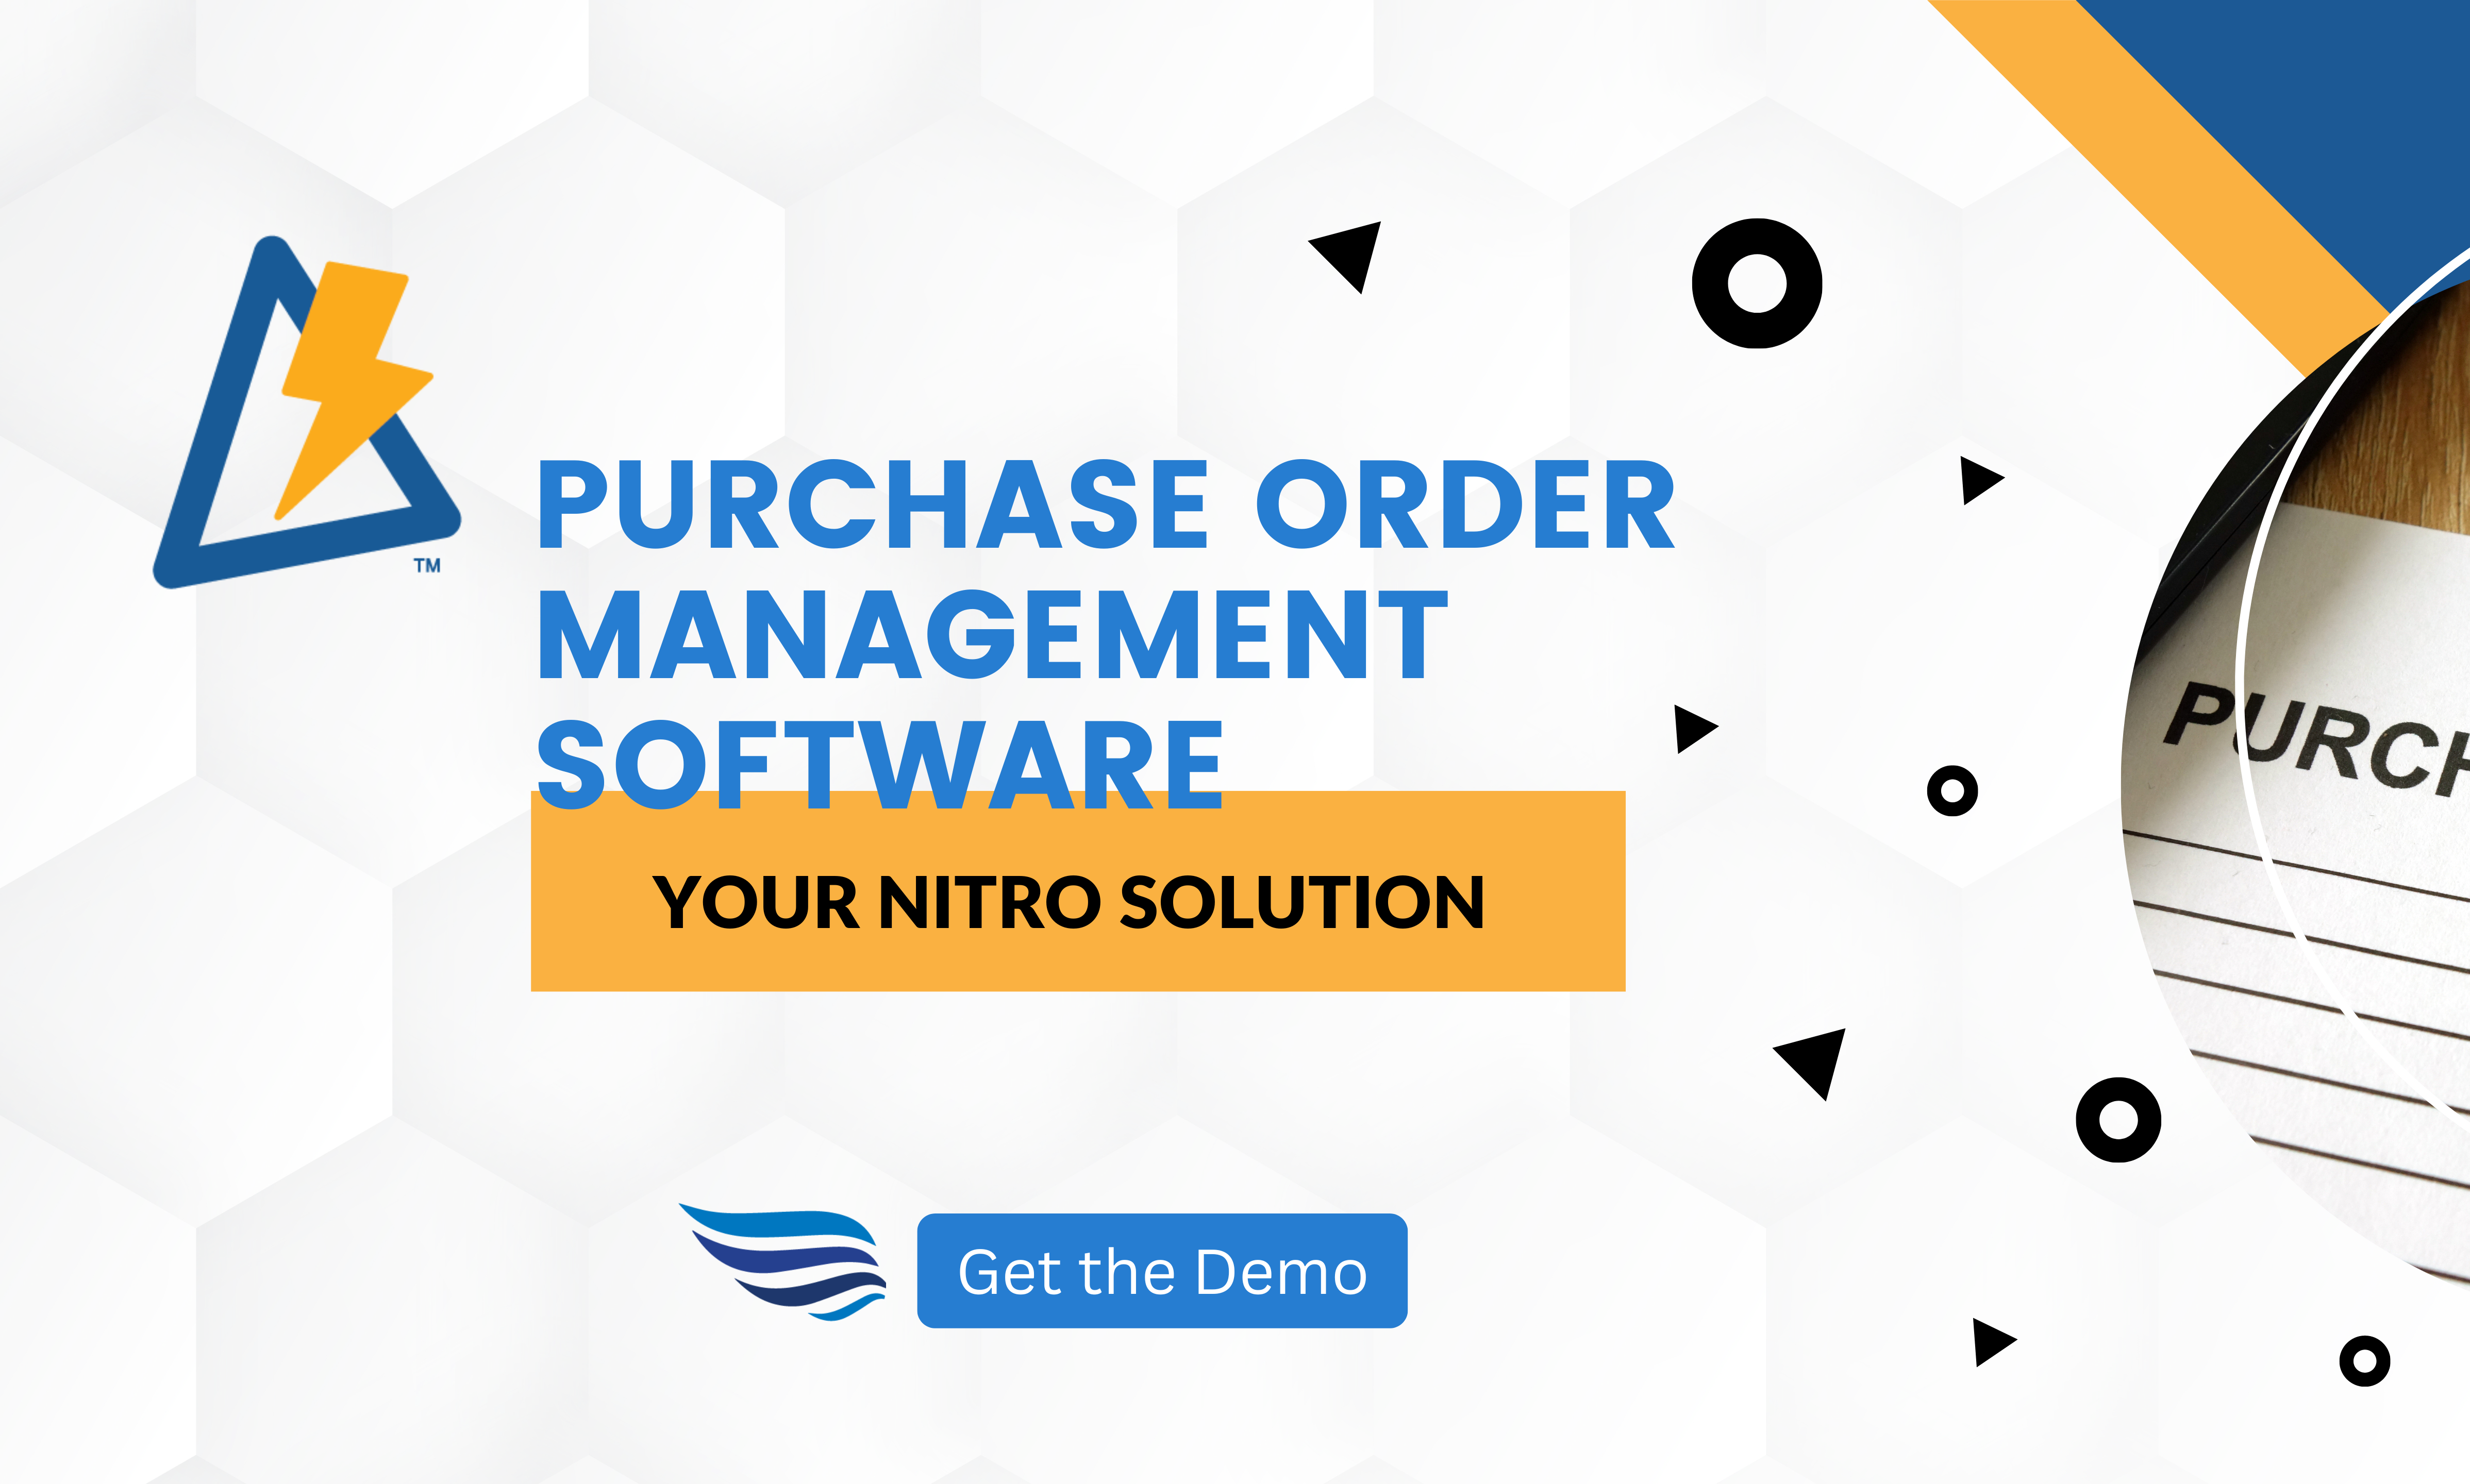 The Best Purchase Order Management Software System on the Market